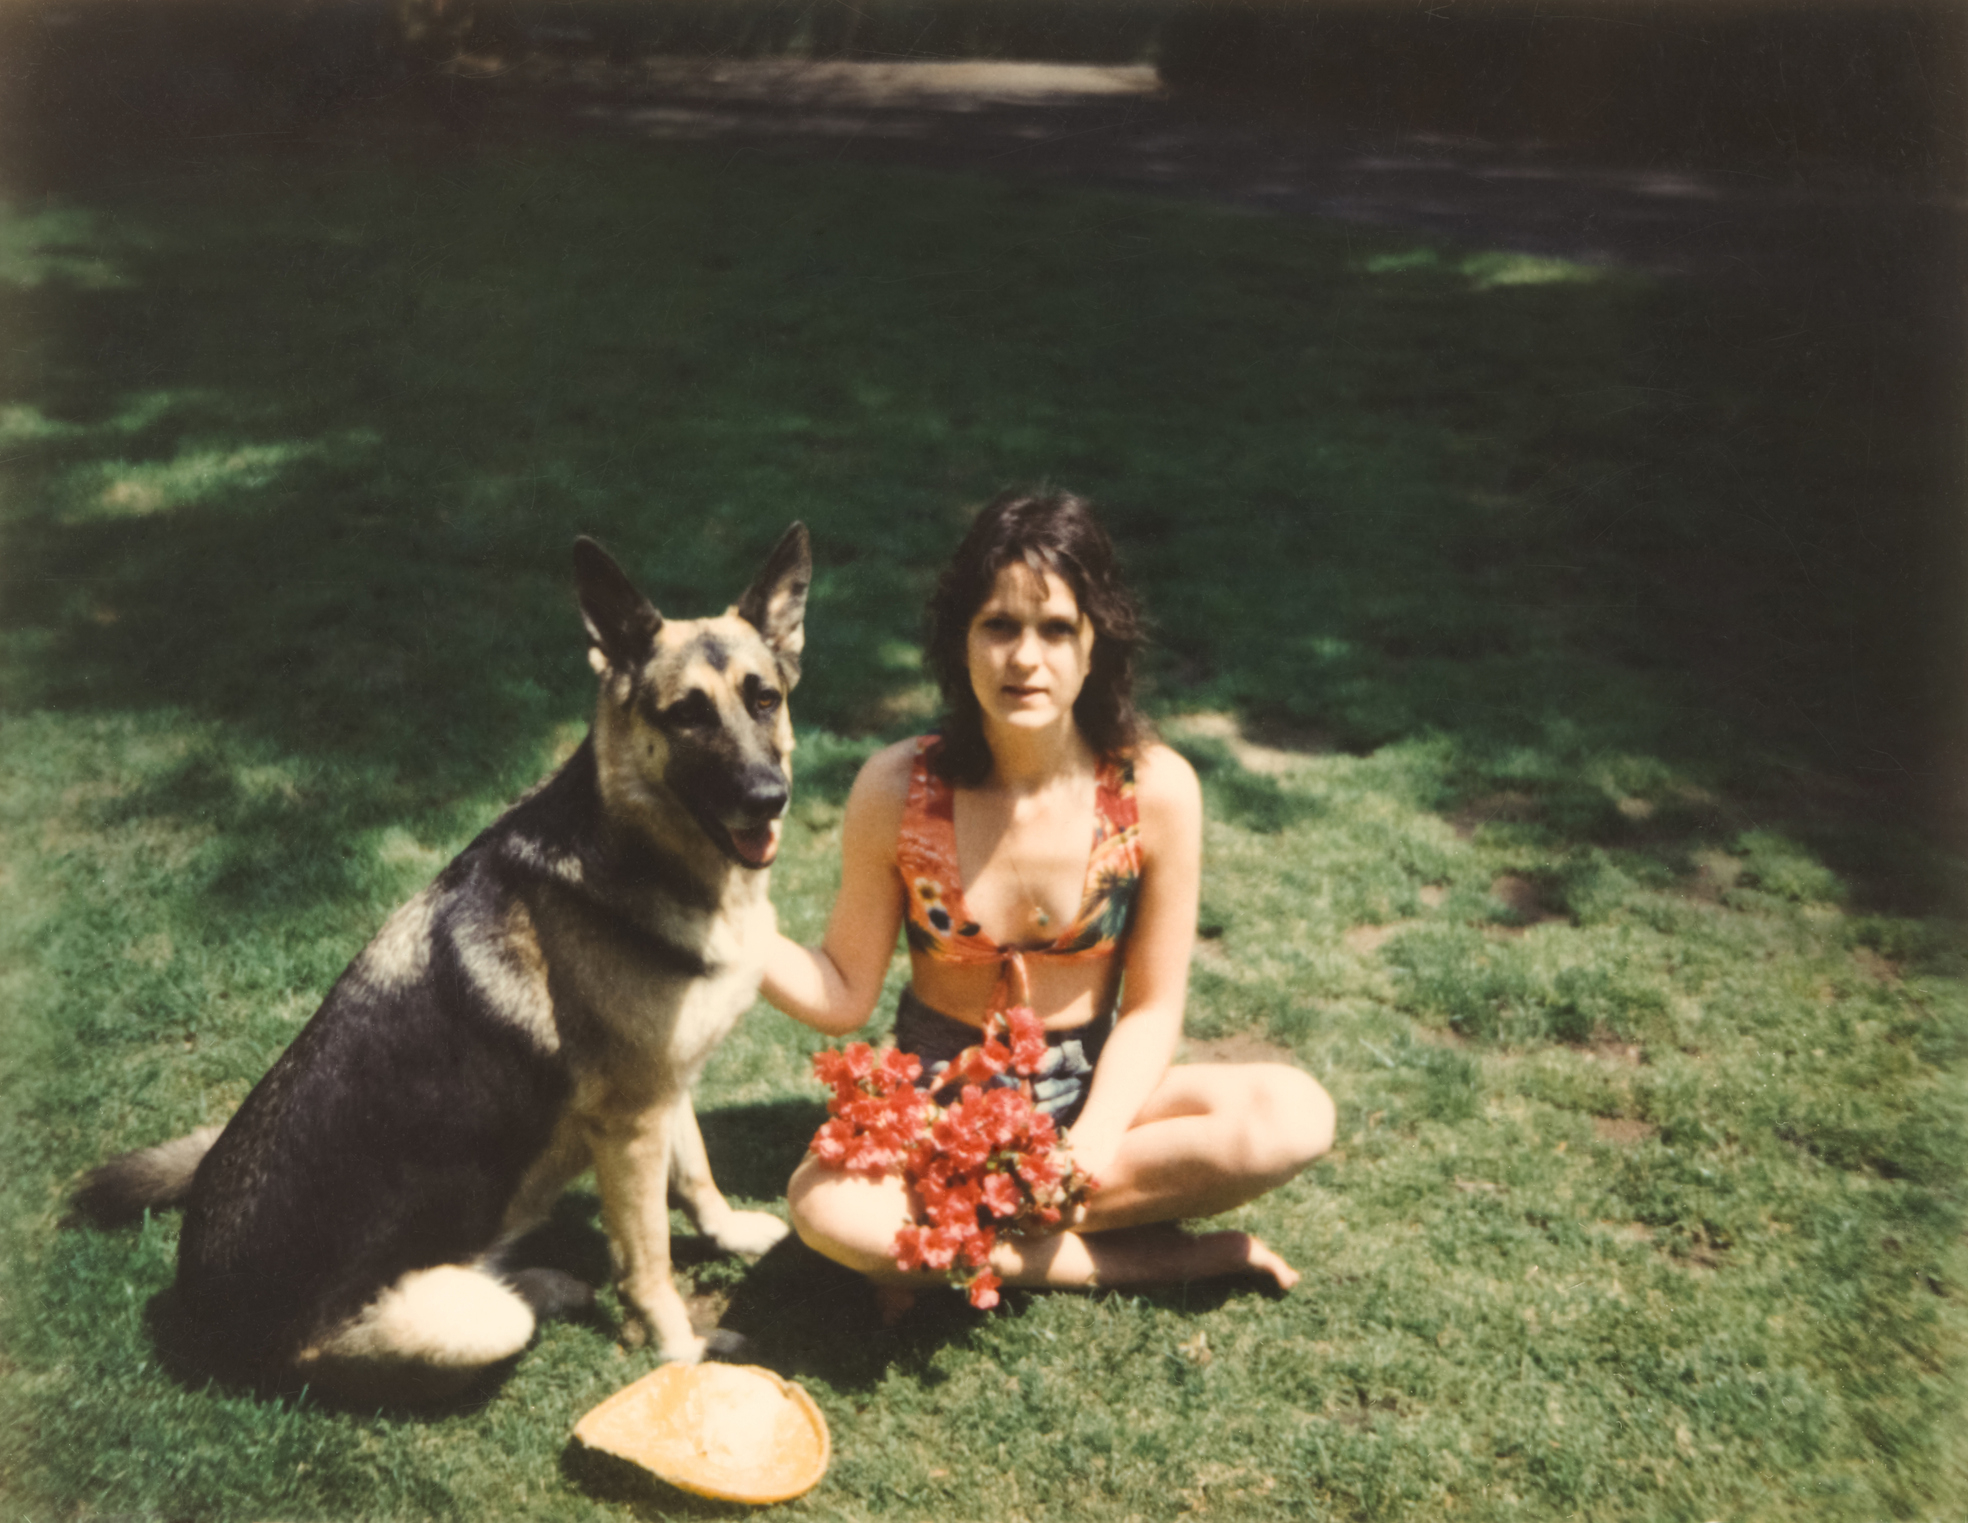 Woman in a floral dress sitting with a German shepherd on grass, both posing for the camera